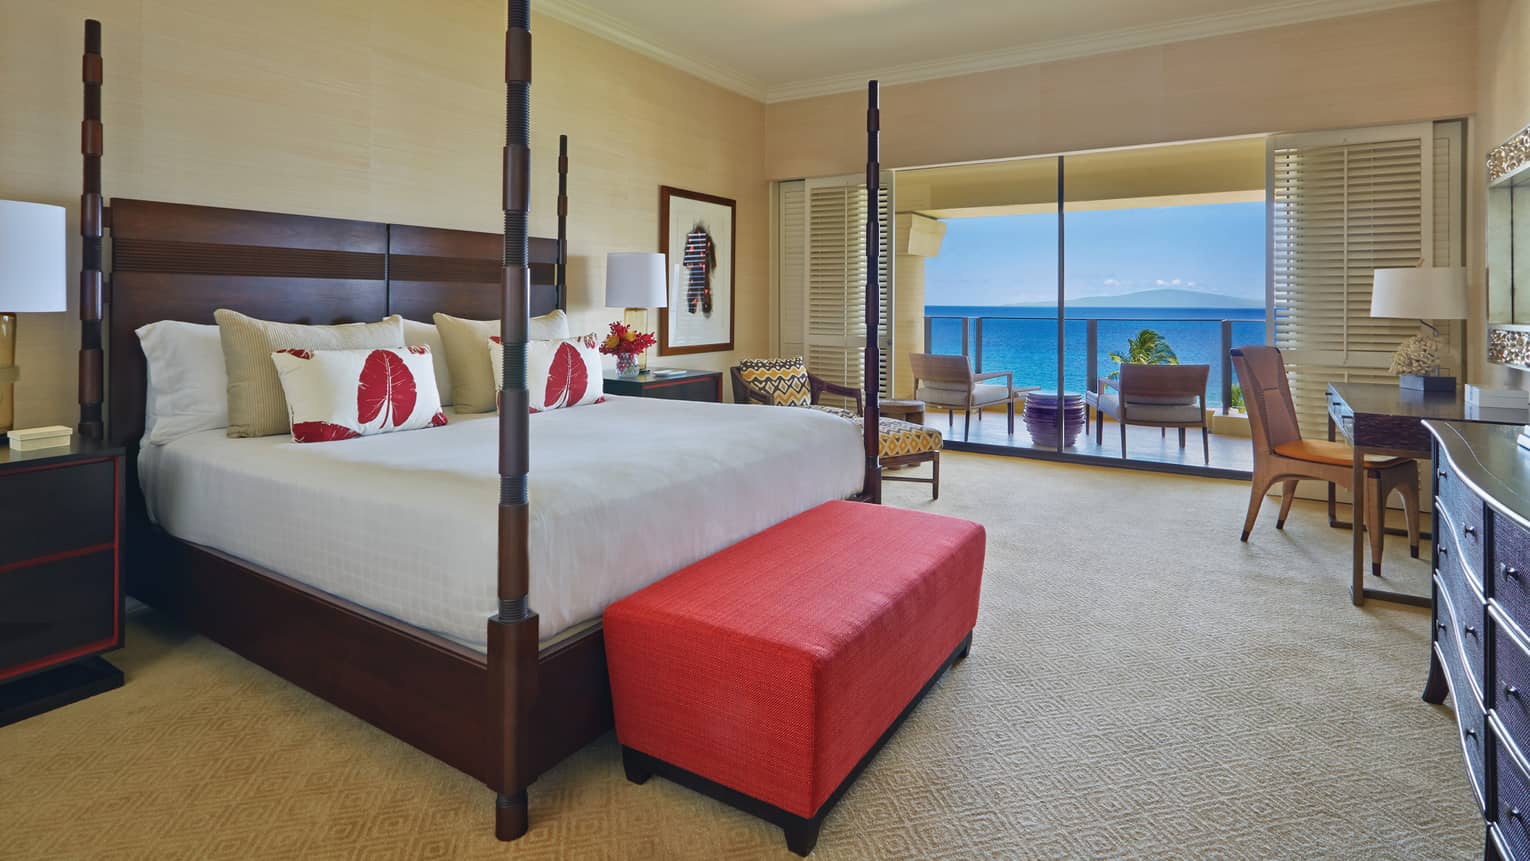 Maile Suite king bedroom with four poster bed and view of the ocean from a private terrace